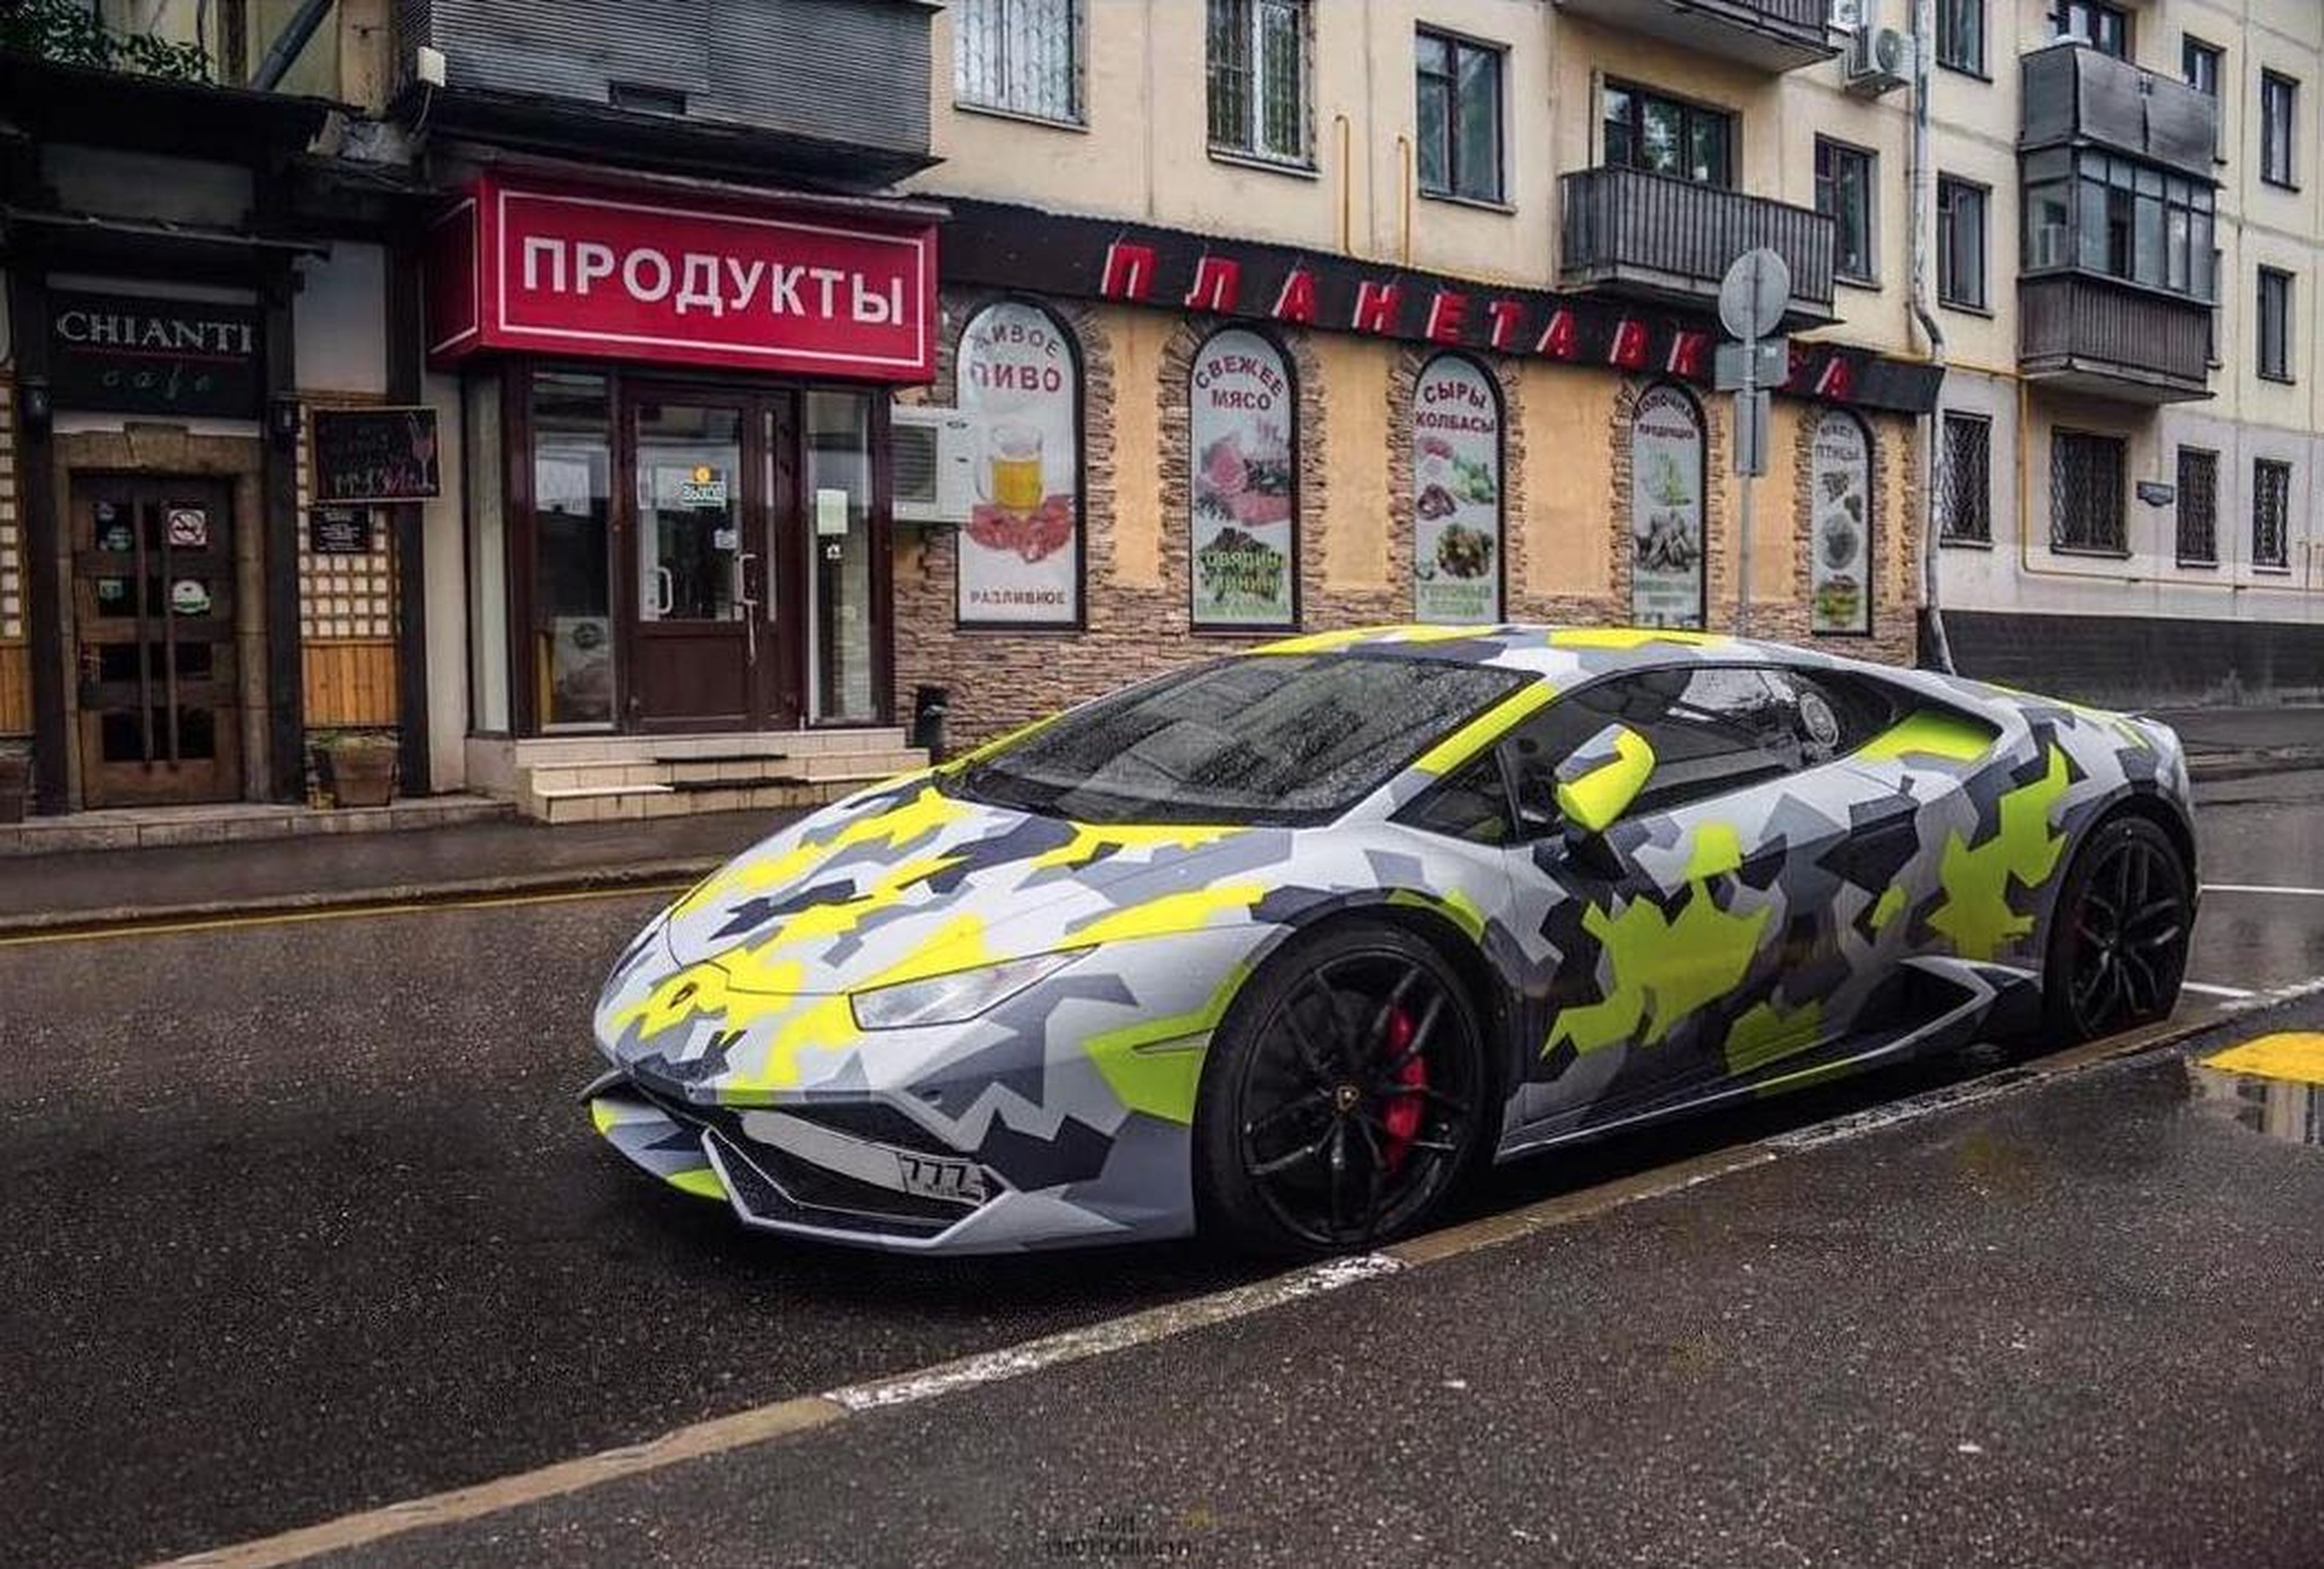 Here's a closer look at that custom Lamborghini Huracan, a car that costs about $250,000 before any customization.